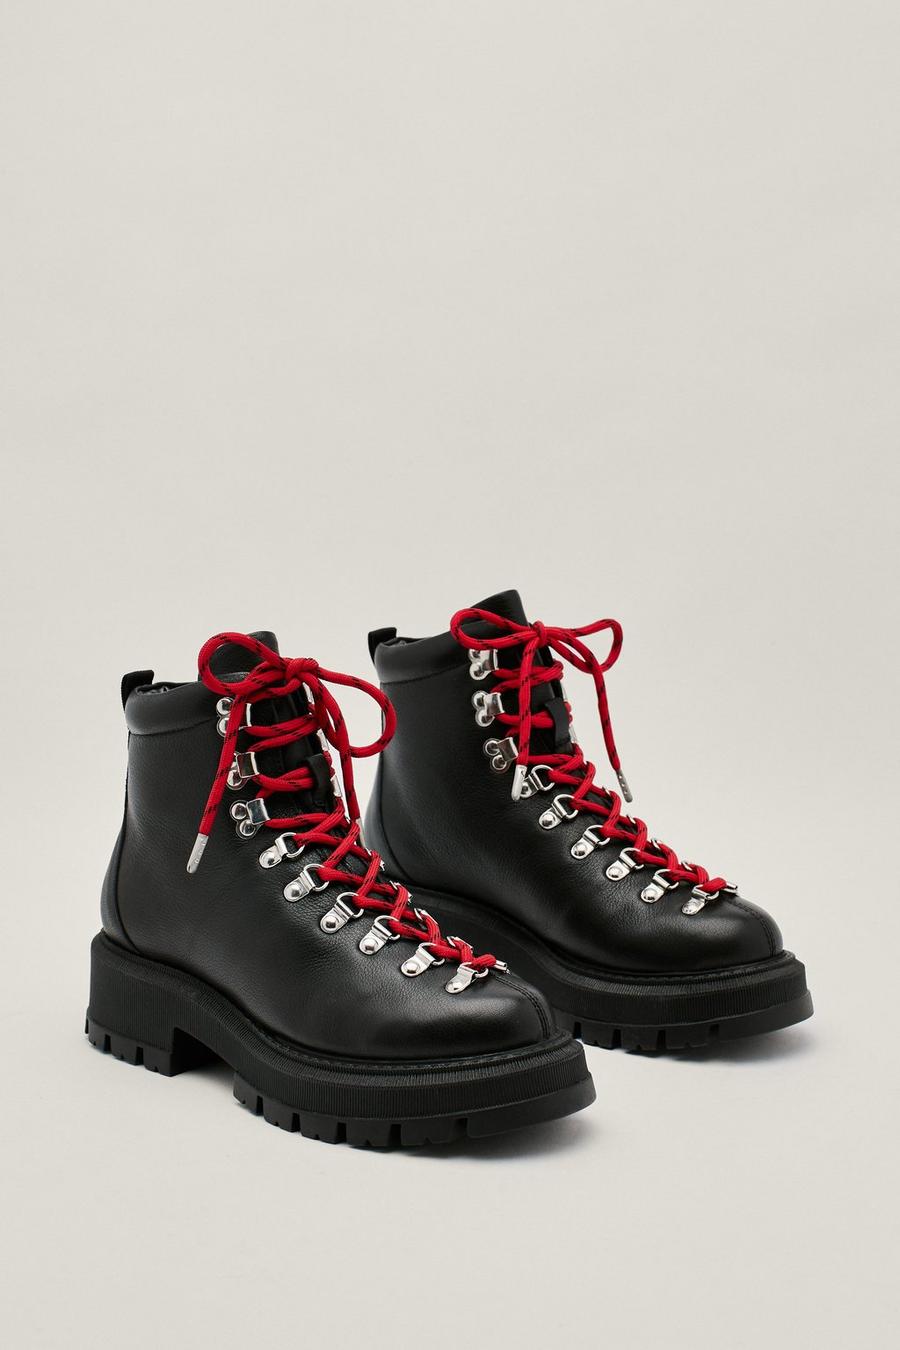 Real Leather Contrast Lace Up Hiker Boots